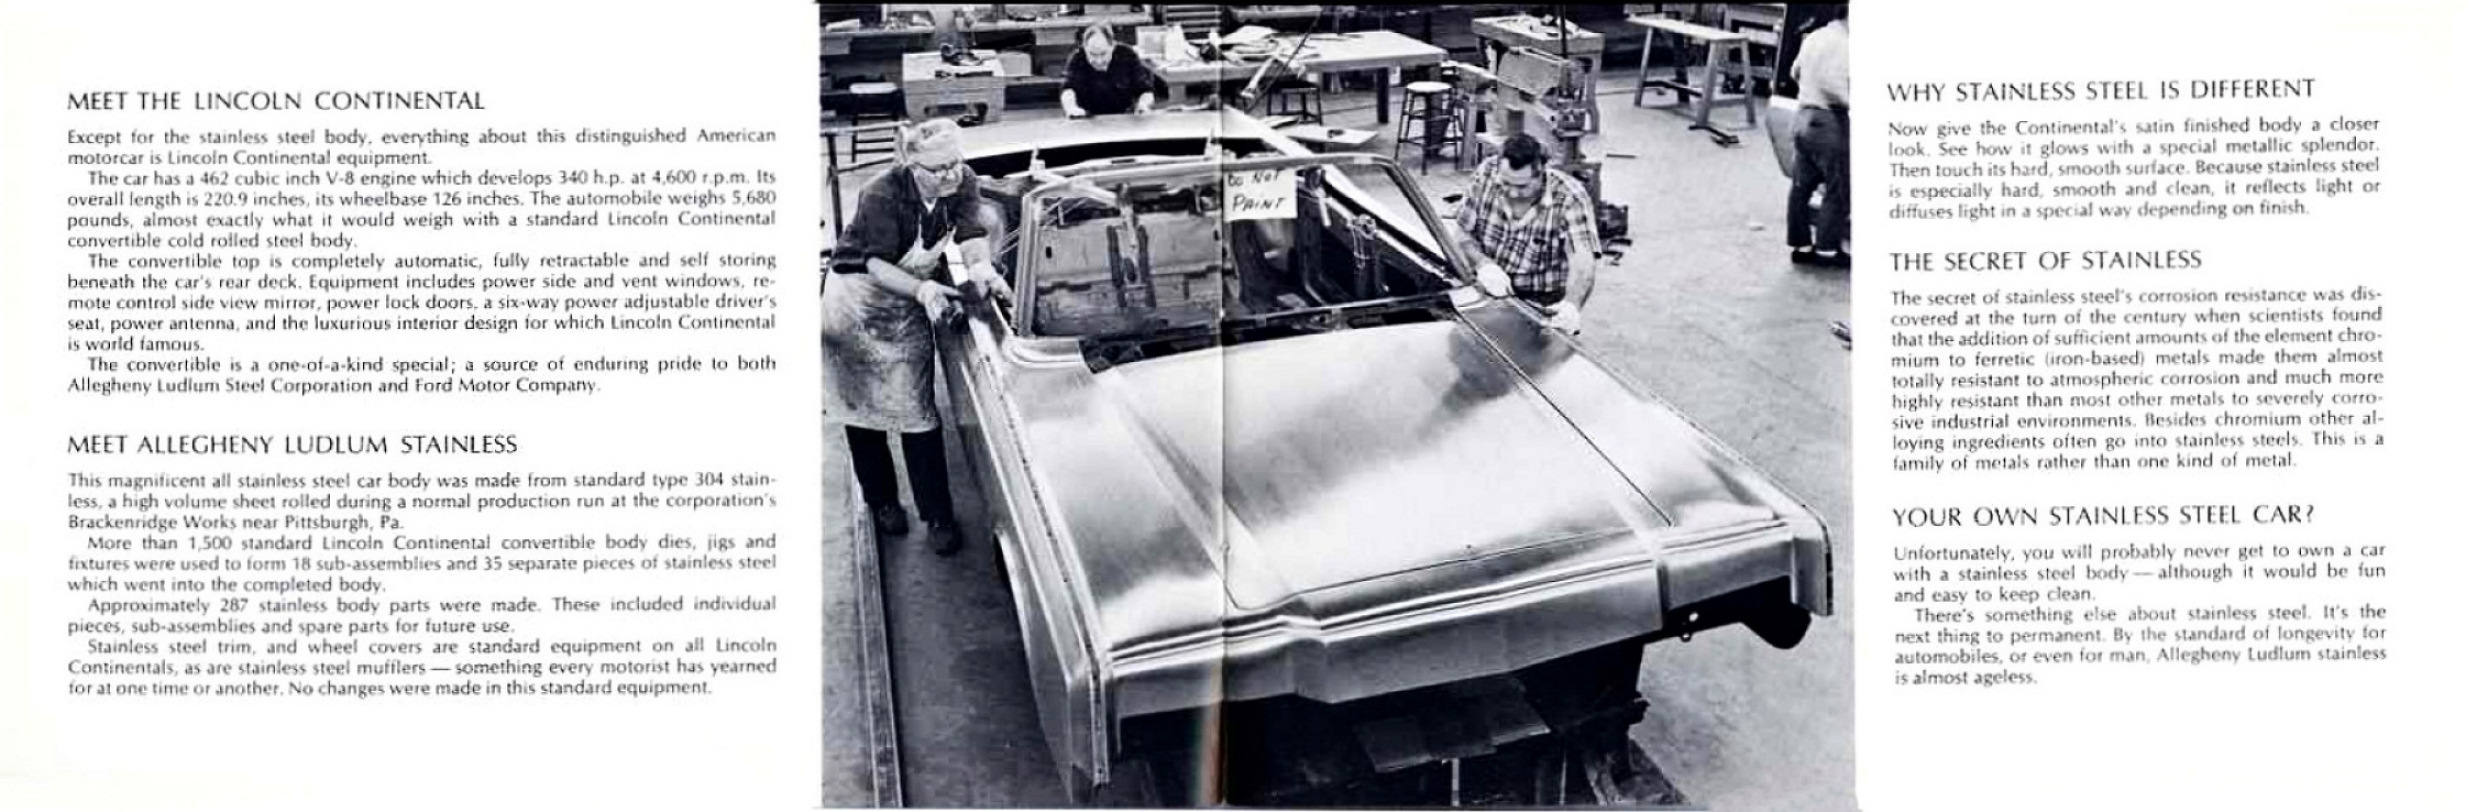 1967_Lincoln_Stainless_Steel-04-05